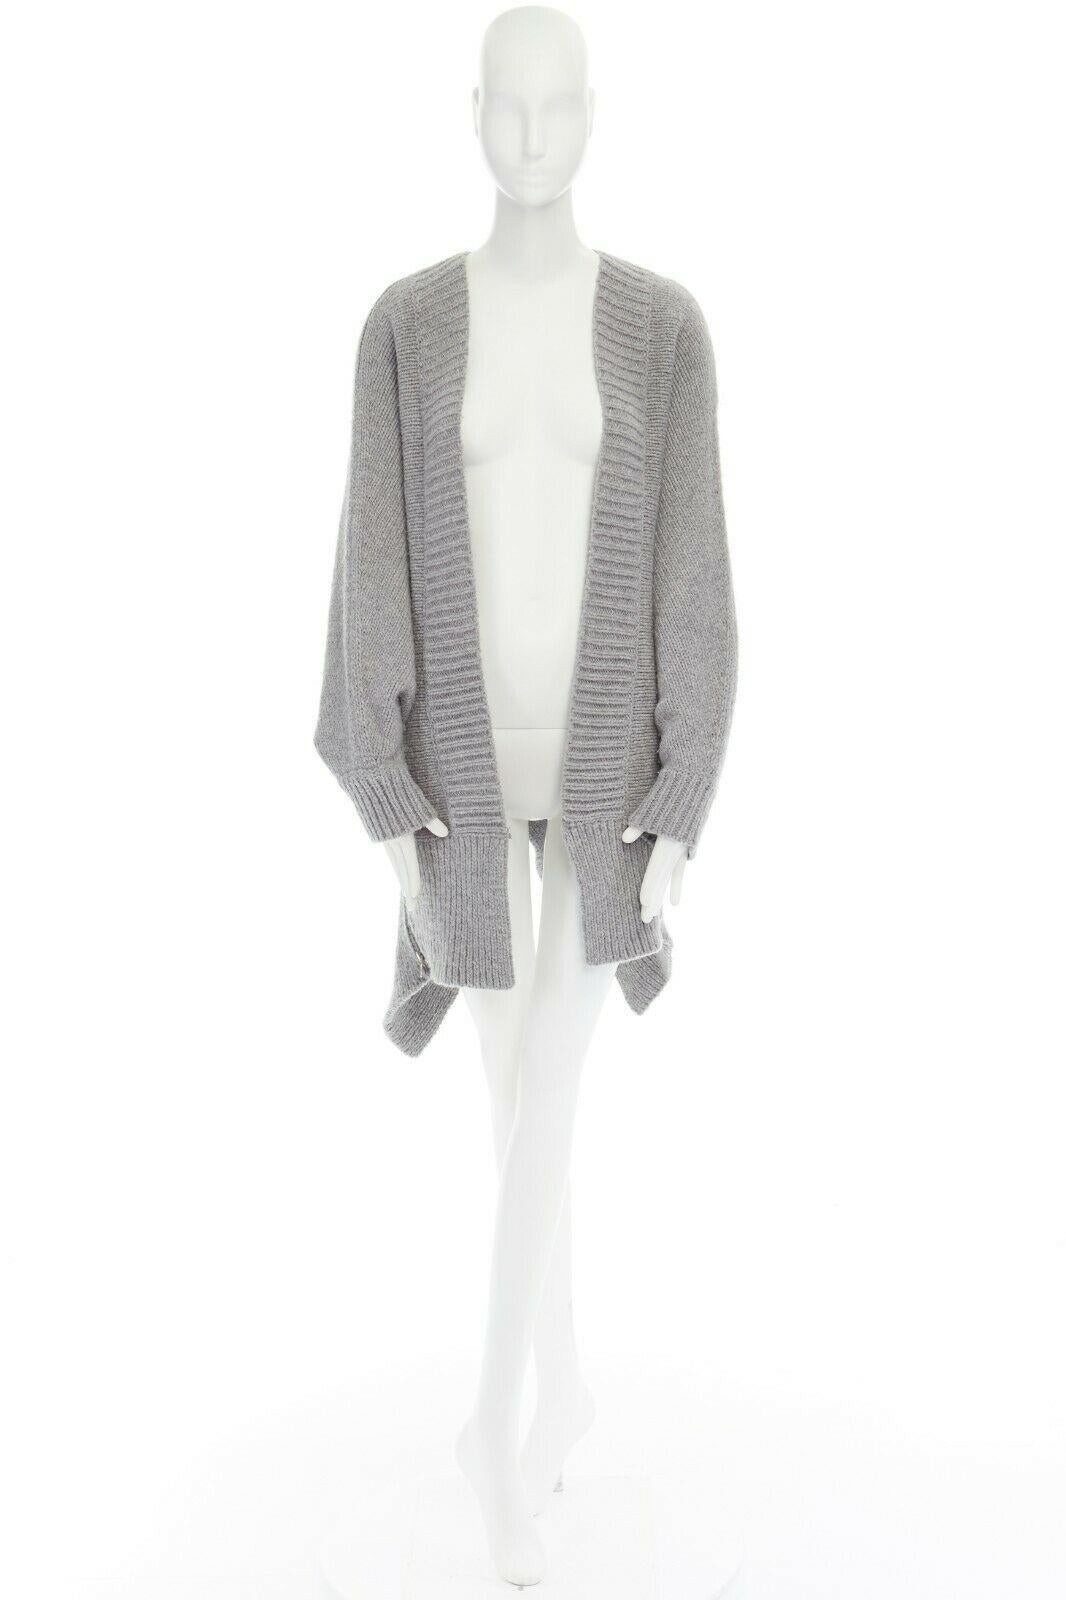 ALEXANDER WANG grey merino wool blend chunky knit zipped trimmed cardigan XS

ALEXANDER WANG
Merino wool, nylon. Light grey. Ribbed open front. Single hook and eye front closure. Rounded shoulder. Extreme wide sleeves. RIbbed cuff. Silver tone